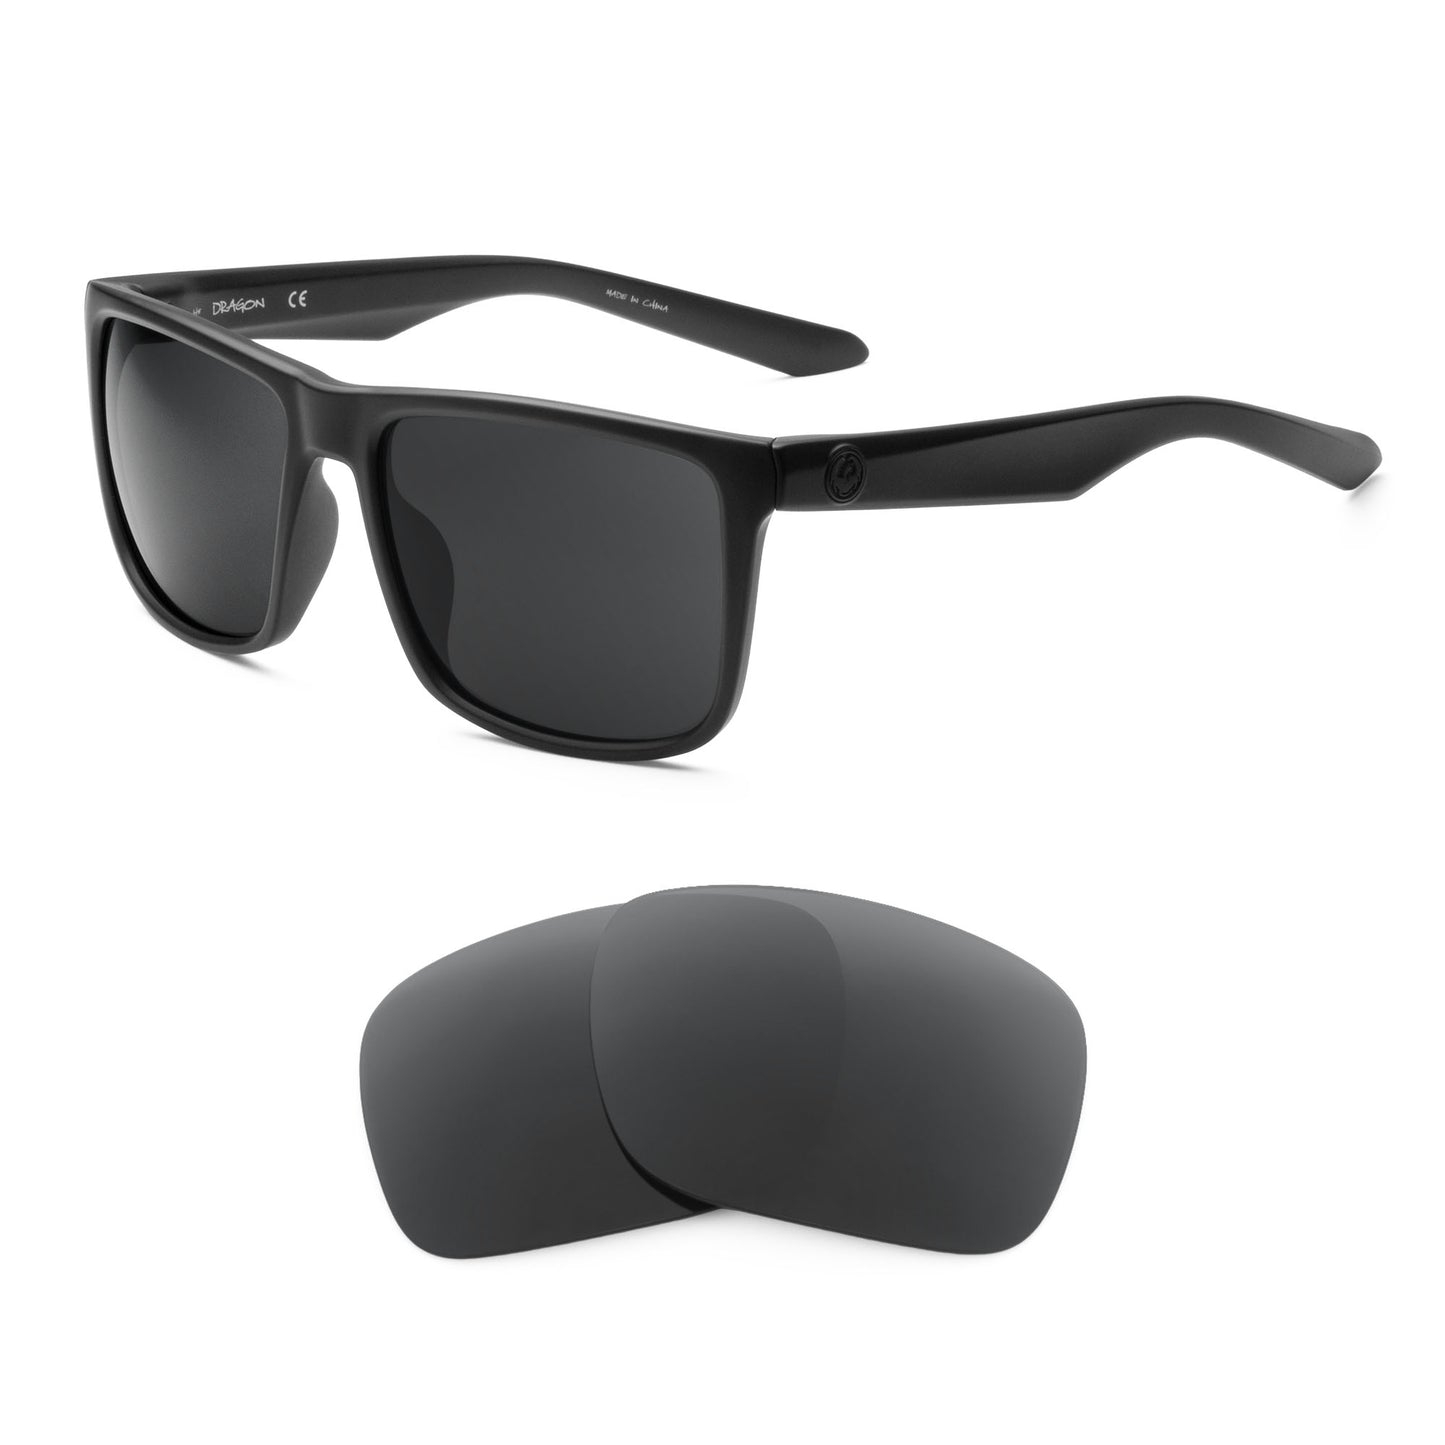 Dragon Meridien sunglasses with replacement lenses